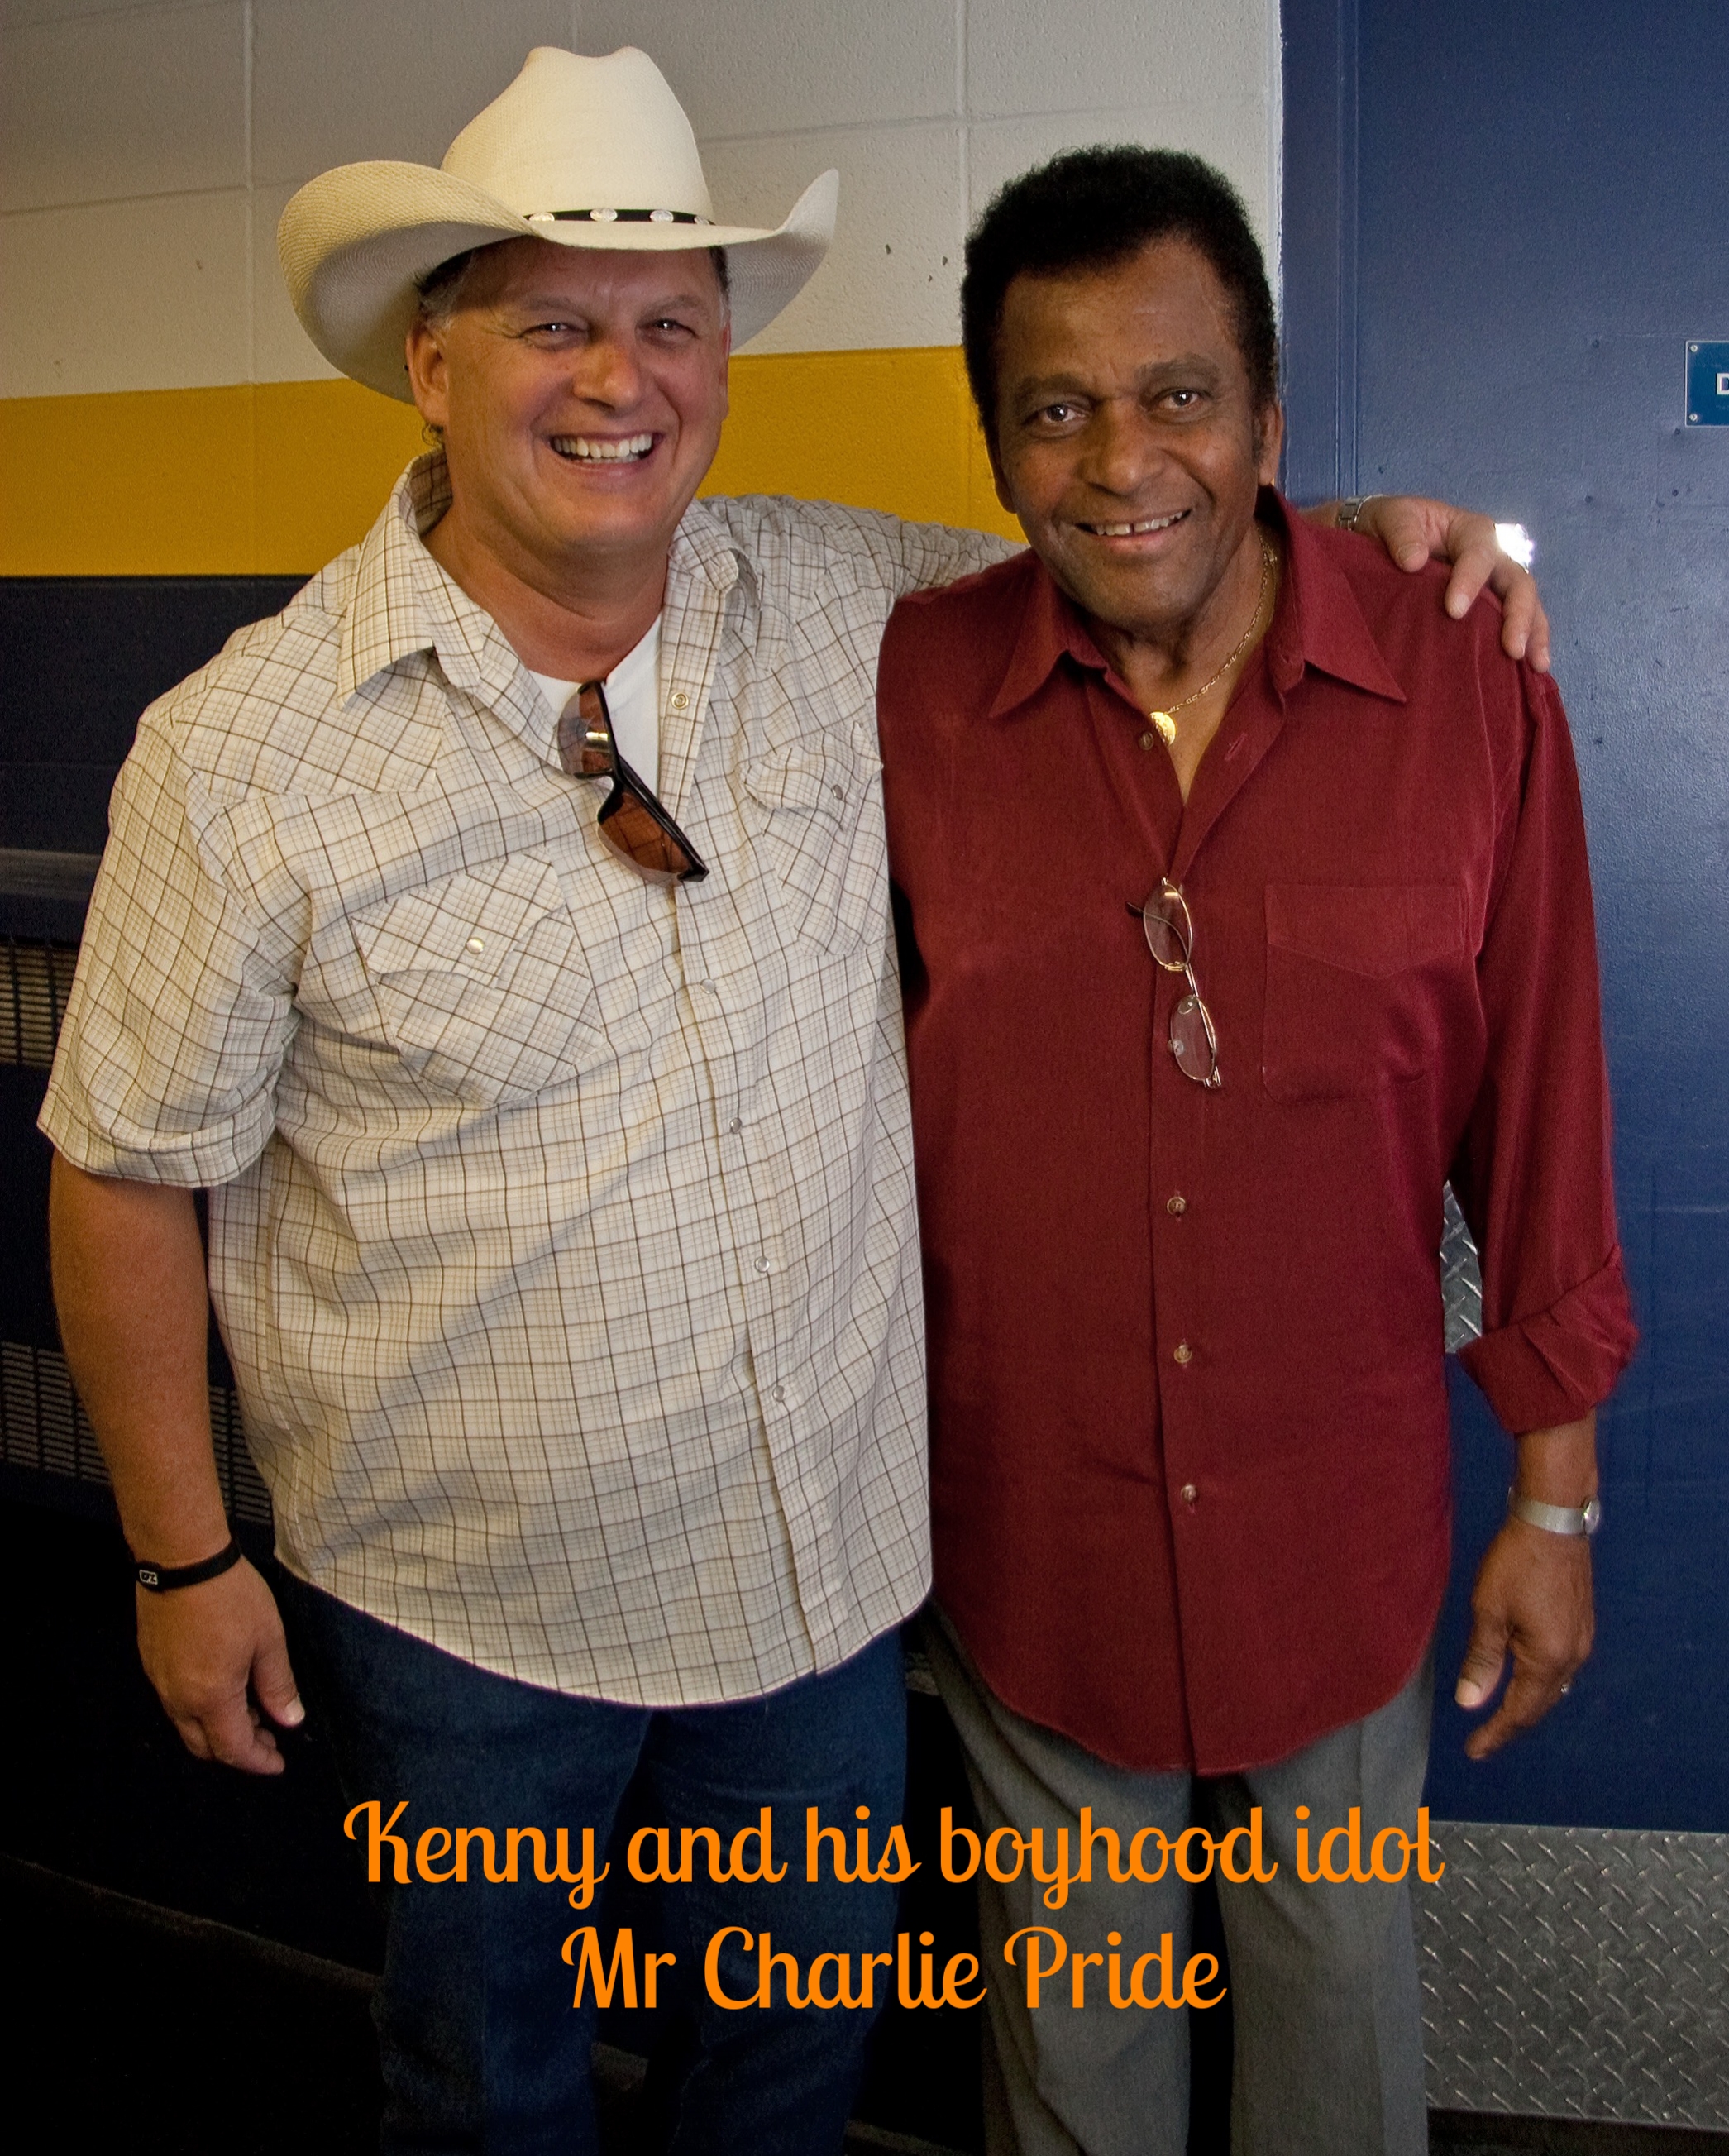 Kenny with a childhood hero Charlie Pride